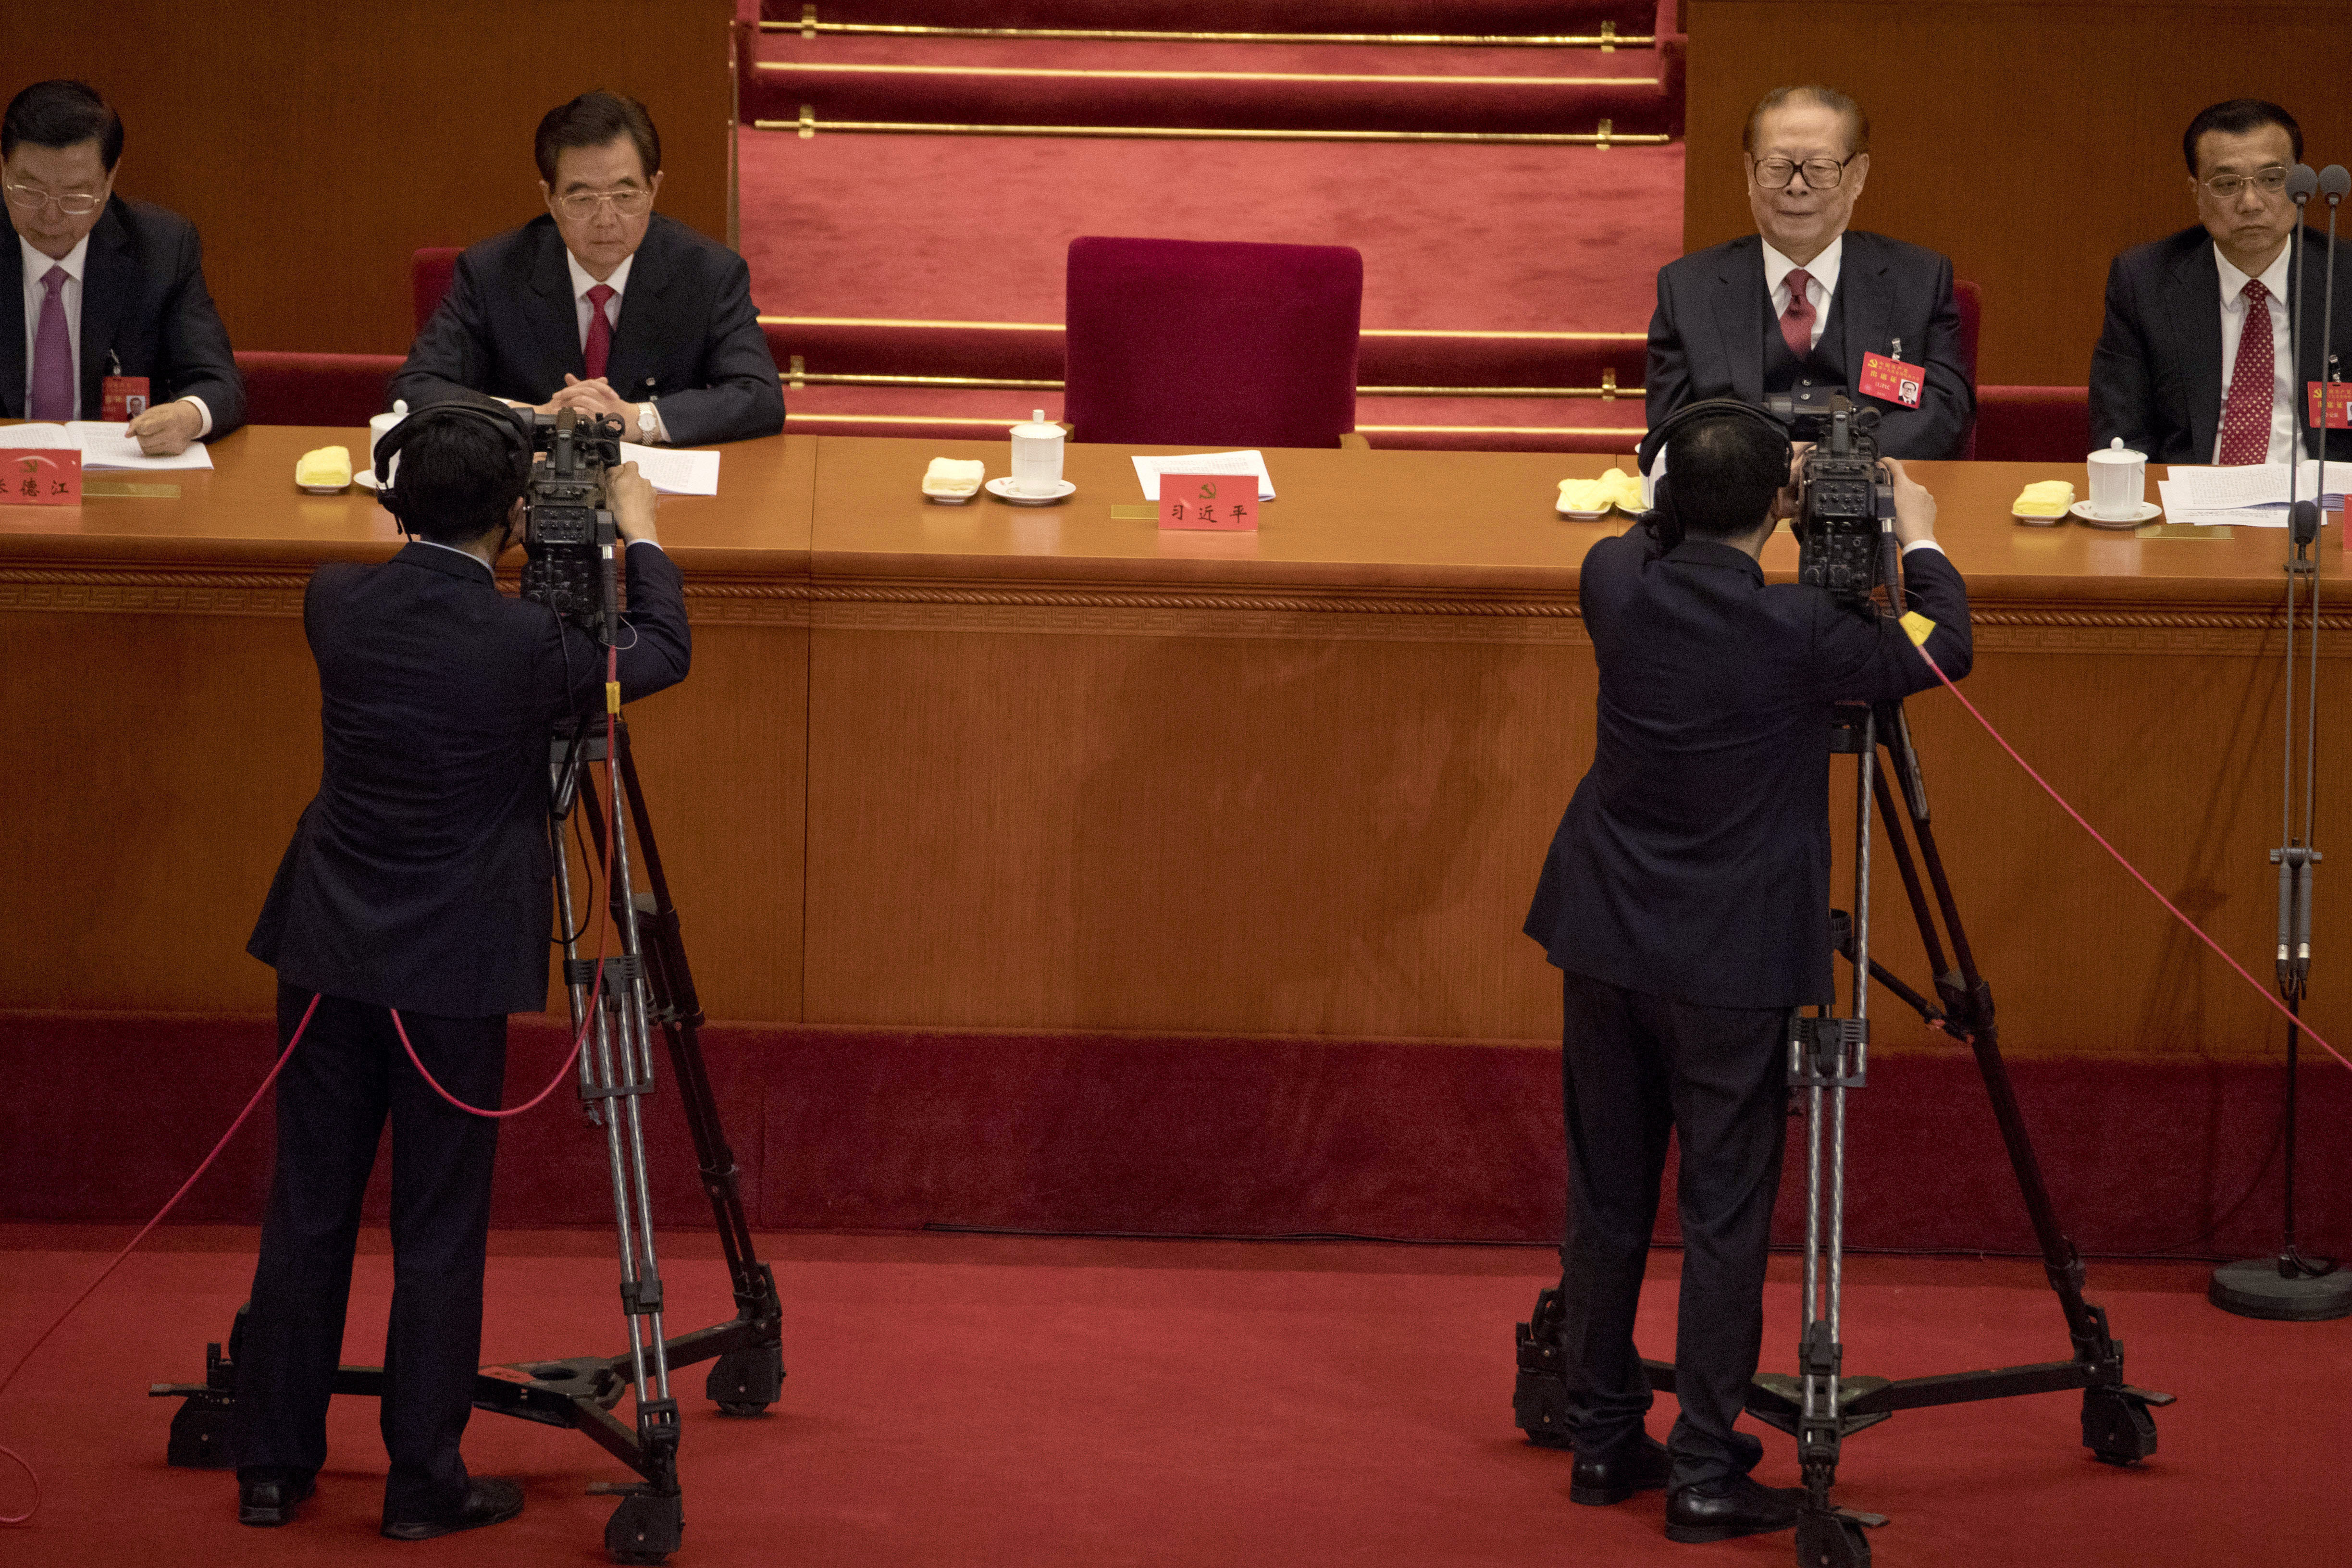 Former Chinese President Jiang Zemin, second from right, and former Chinese President Hu Jintao, second from left, attend the opening ceremony of the 19th Party Congress held at the Great Hall of the People in Beijing, China, Wednesday, Oct. 18, 2017. Chinese President Xi Jinping on Wednesday urged a reinvigorated Communist Party to take on a more forceful role in society and economic development to better address 